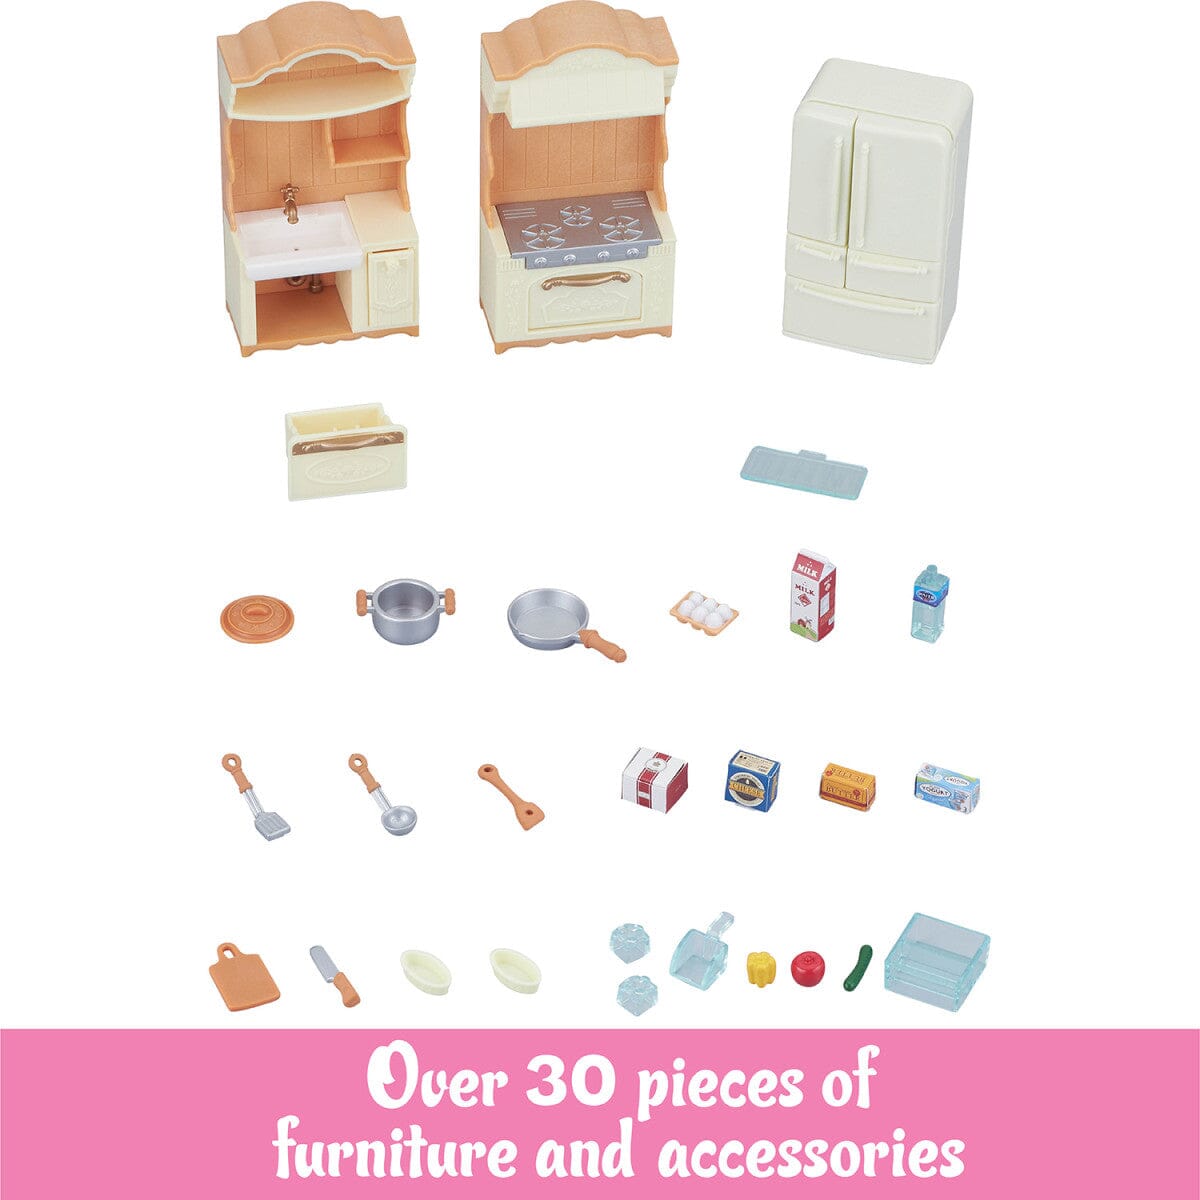 Kitchen Play Set by Calico Critters